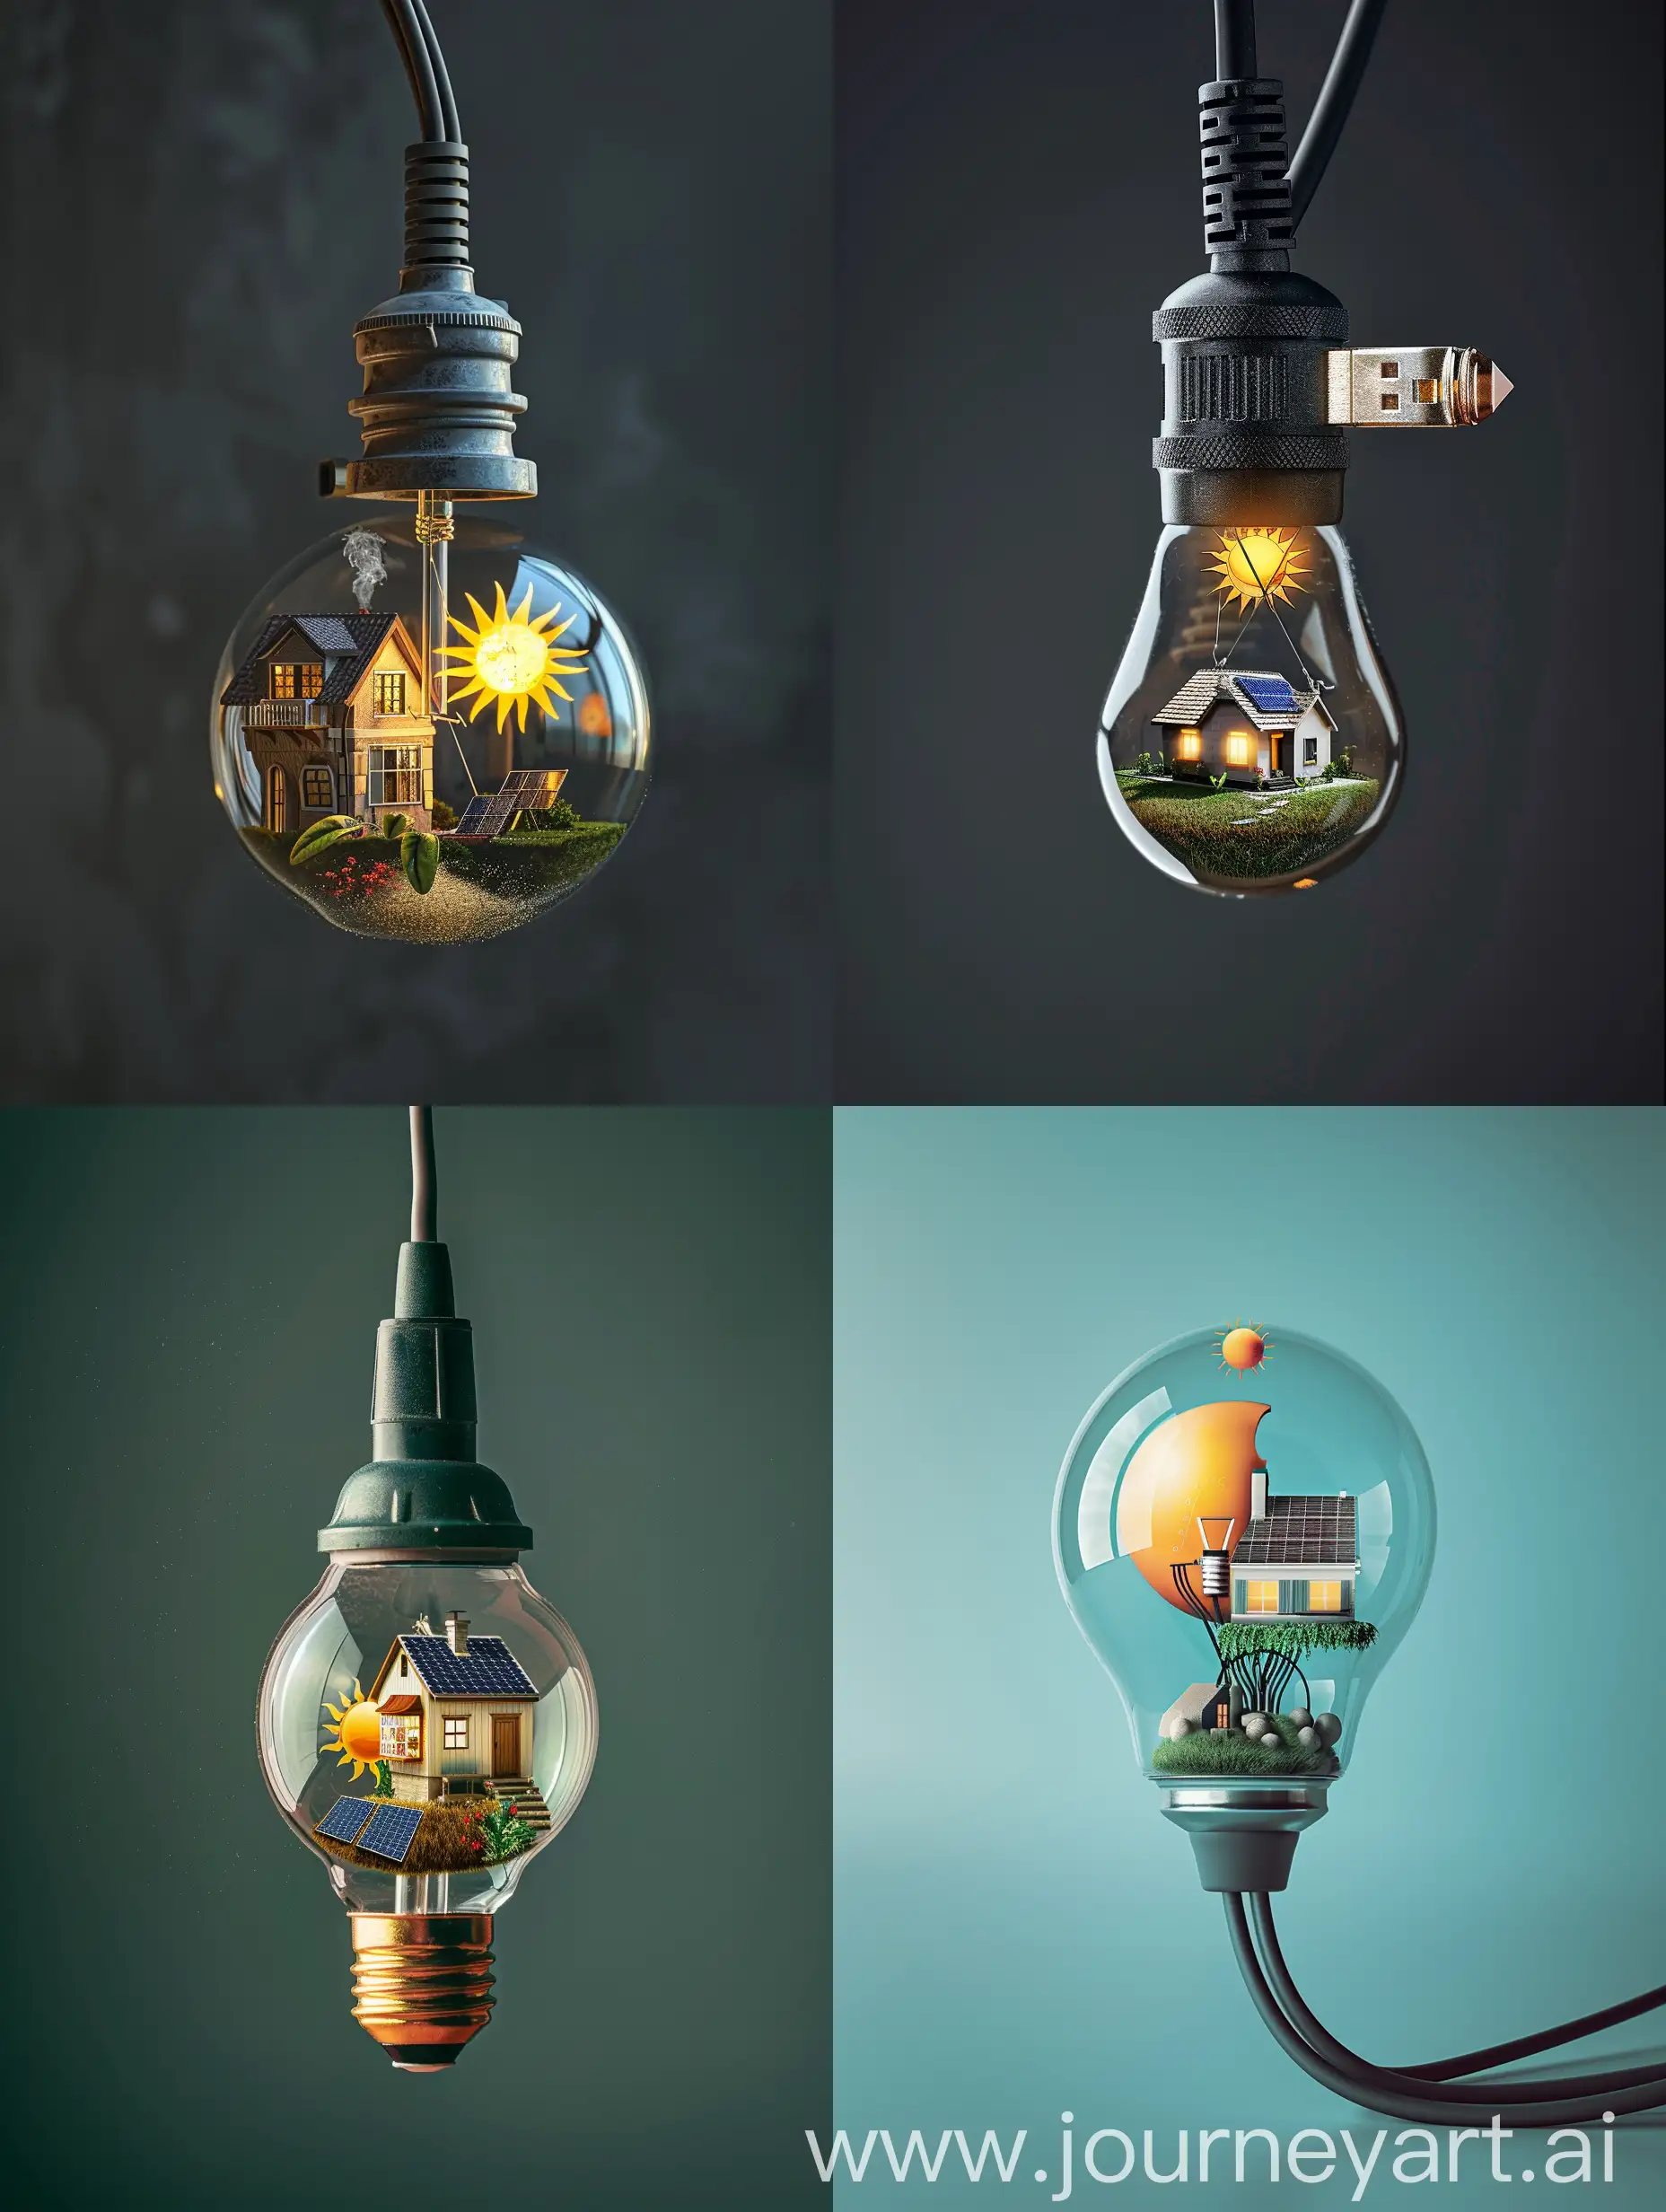 A power cable attached to a creative bulb contains a house with solar panel and sun